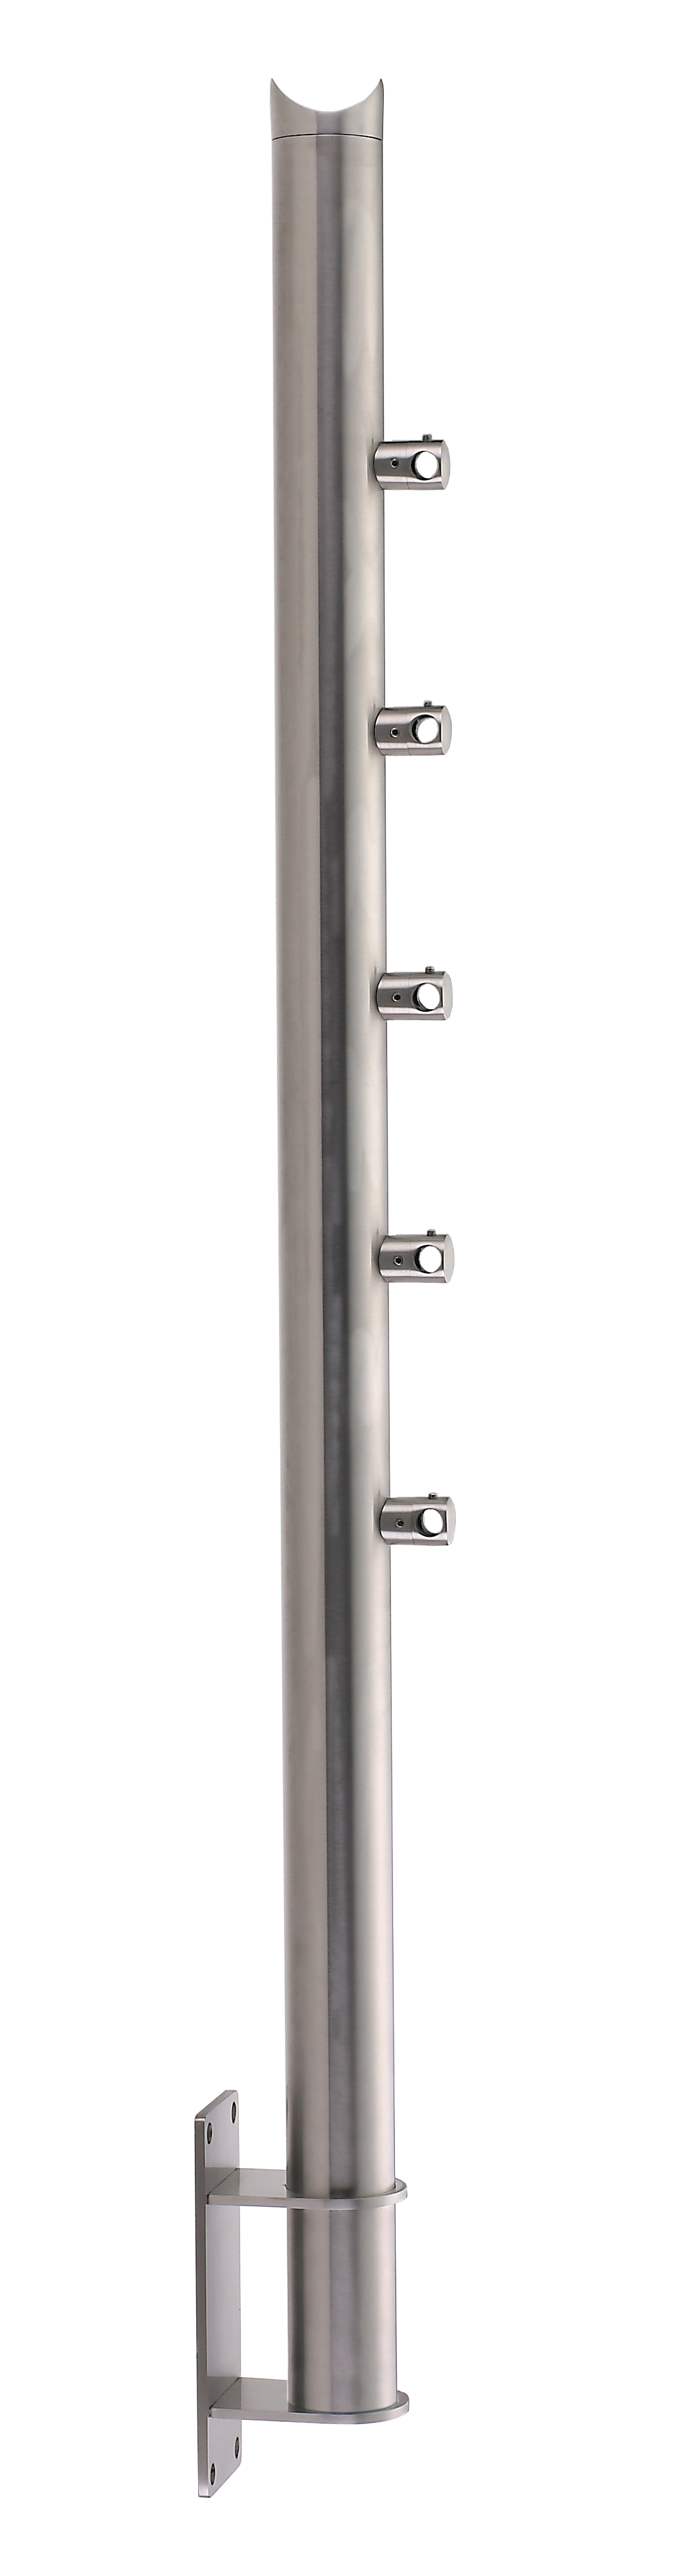 Stainless Steel Balustrade Posts - Tubular - SS:2020576A